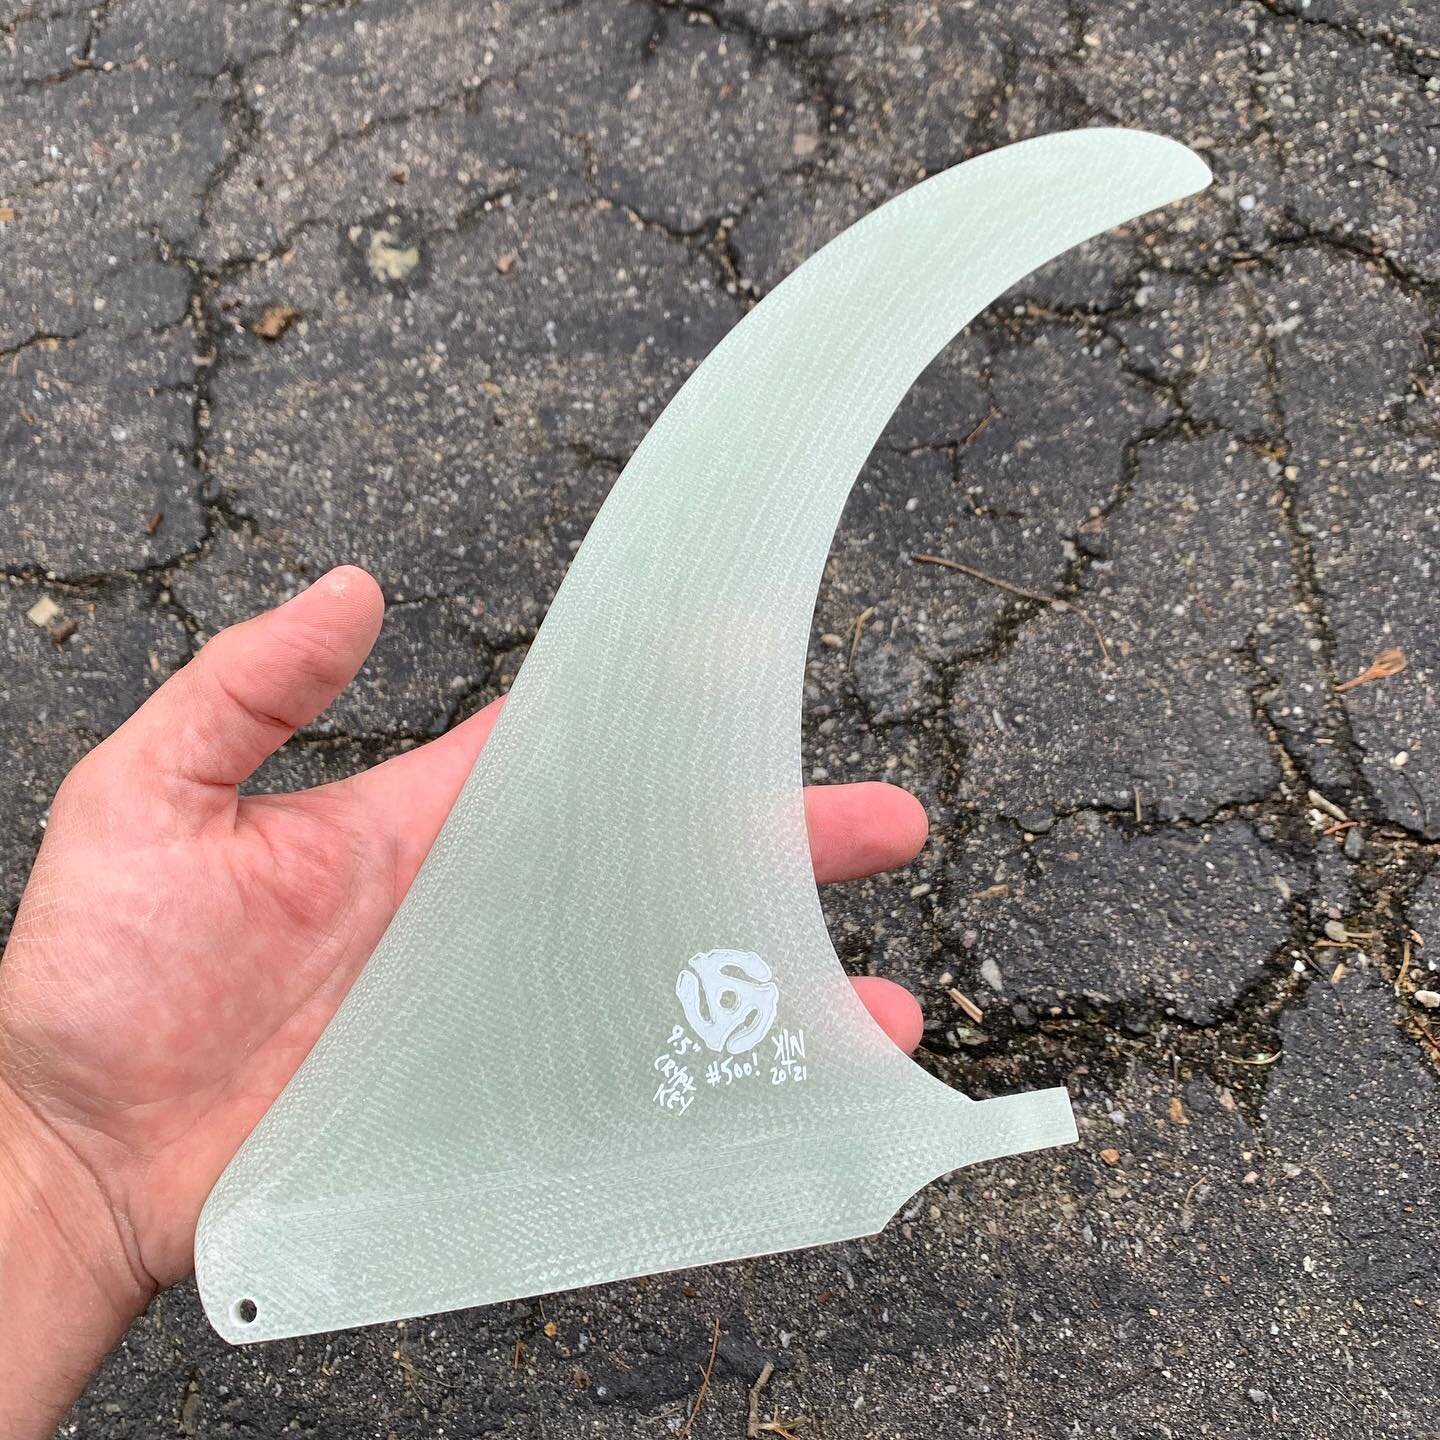 #500

This 9.5&rdquo; Crypt Key will be available along with many other fins soon via @adam.mar. #beniceordie